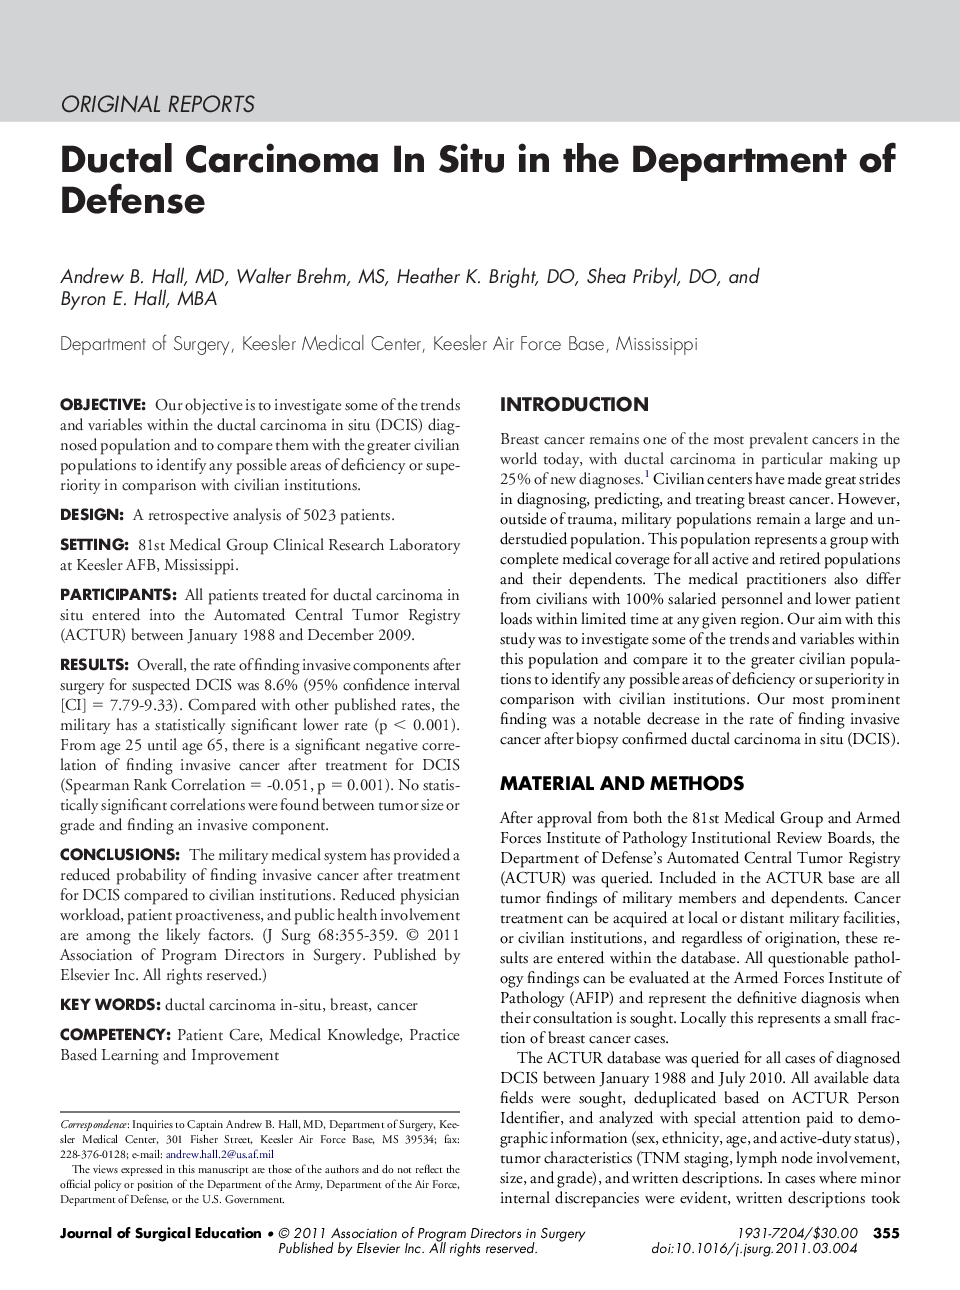 Ductal Carcinoma In Situ in the Department of Defense 